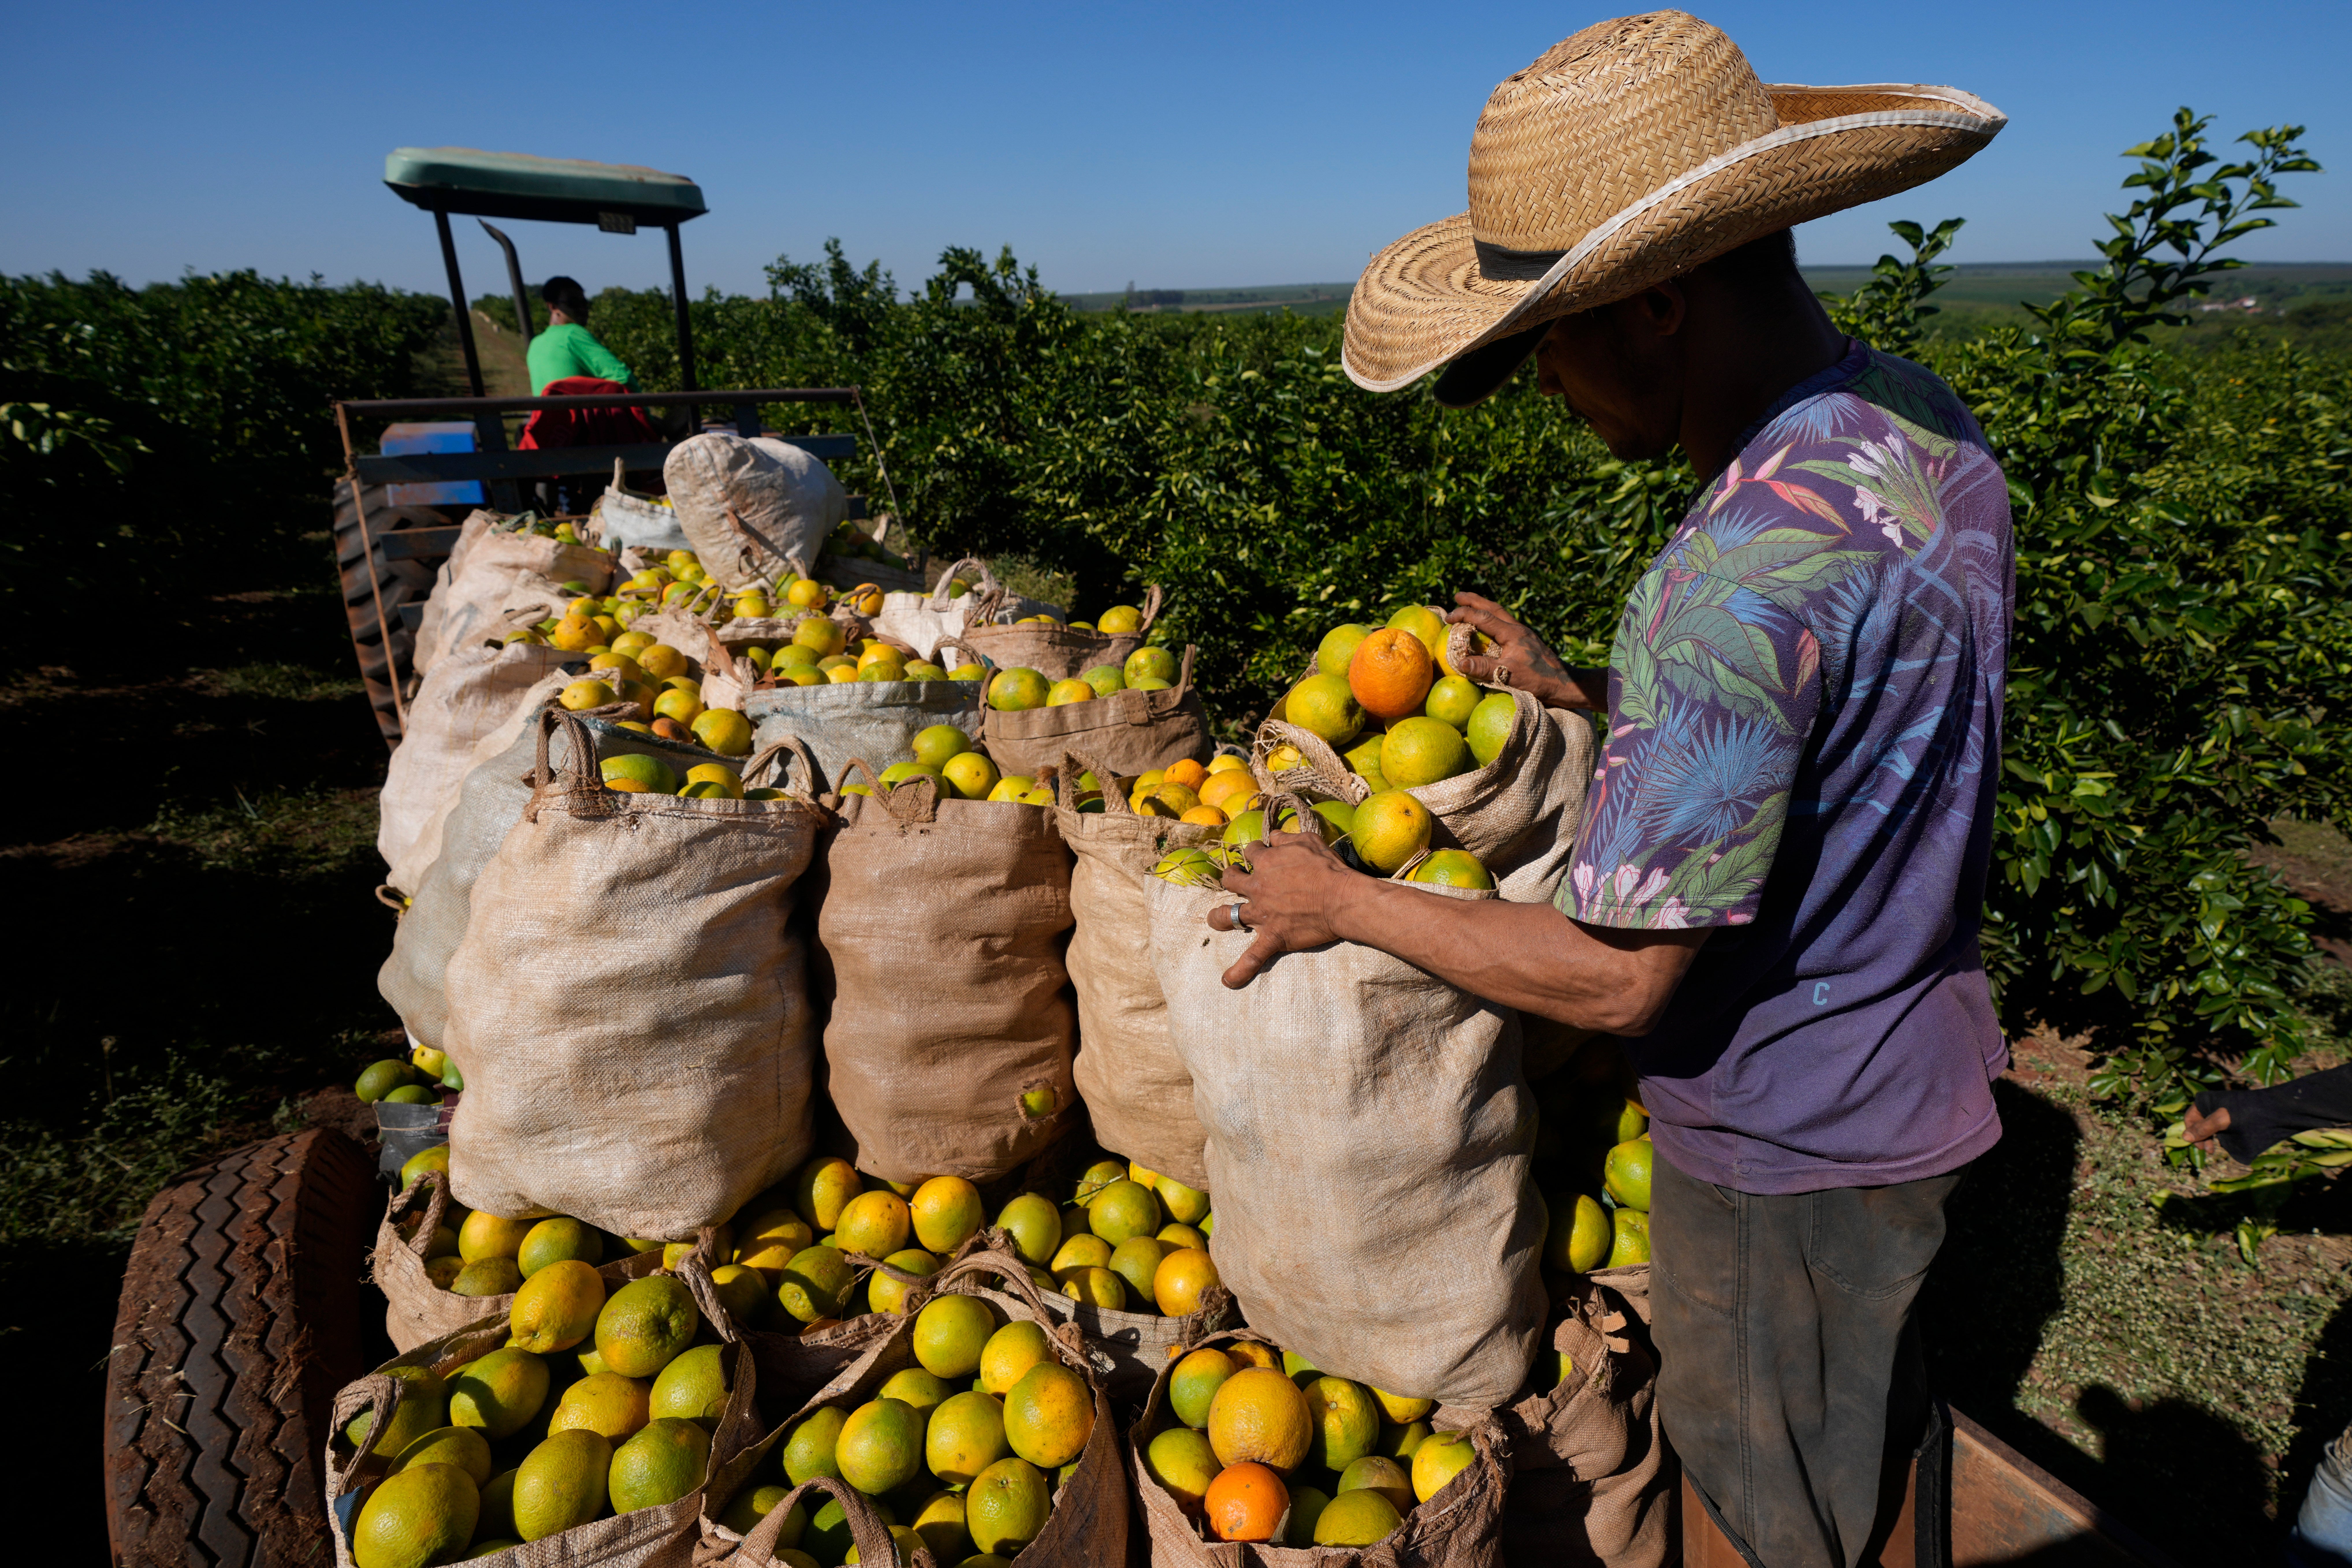 Orange juice prices have reached an all time high amid climate-fueled extreme weather in Brazil